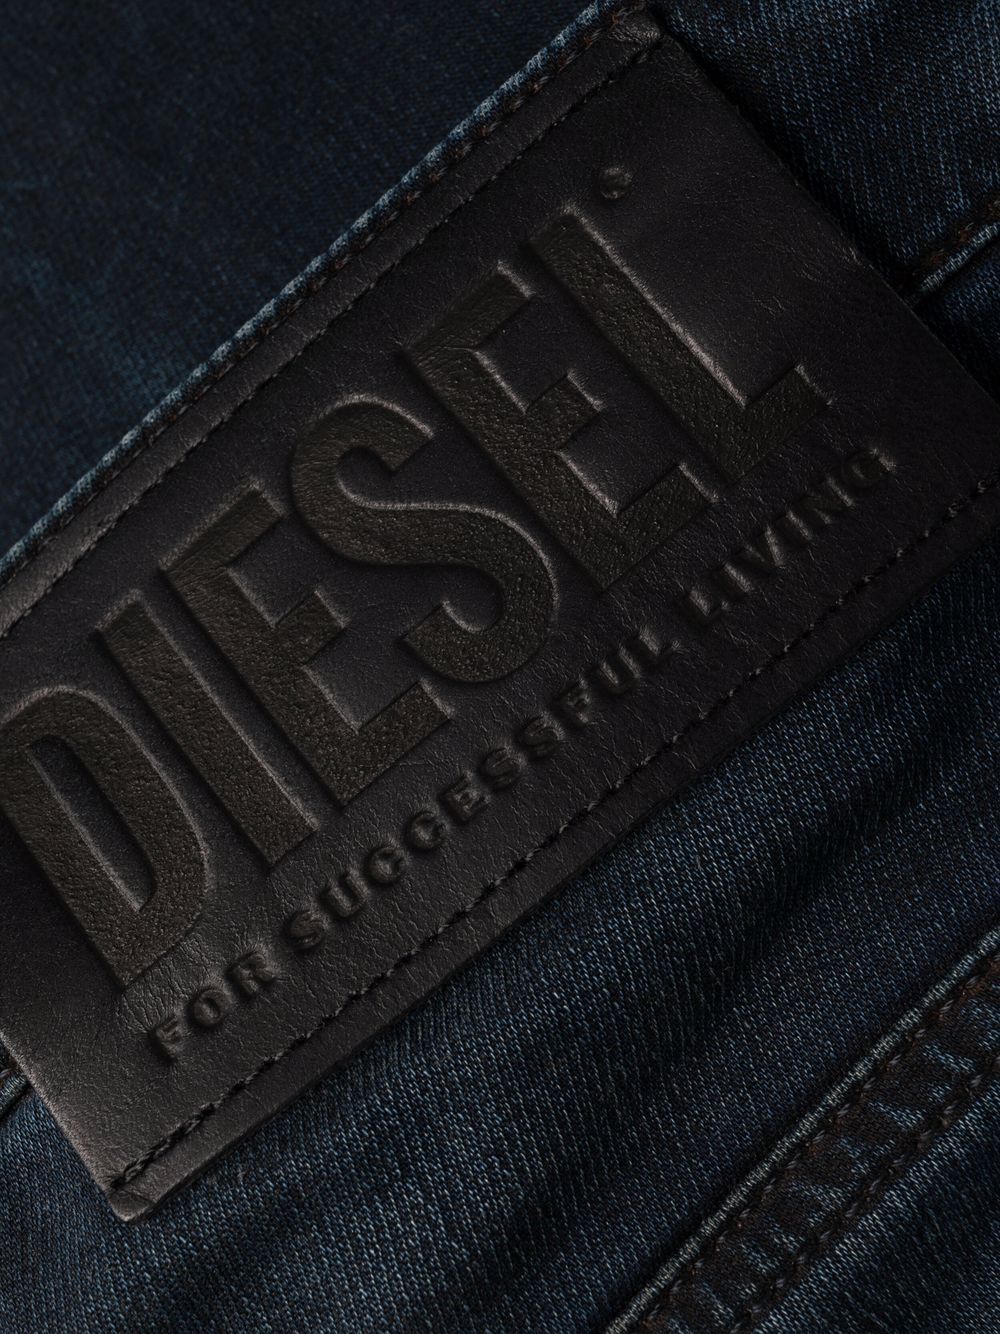 Shop Diesel Krooley tapered leg jeans with Express Delivery - FARFETCH